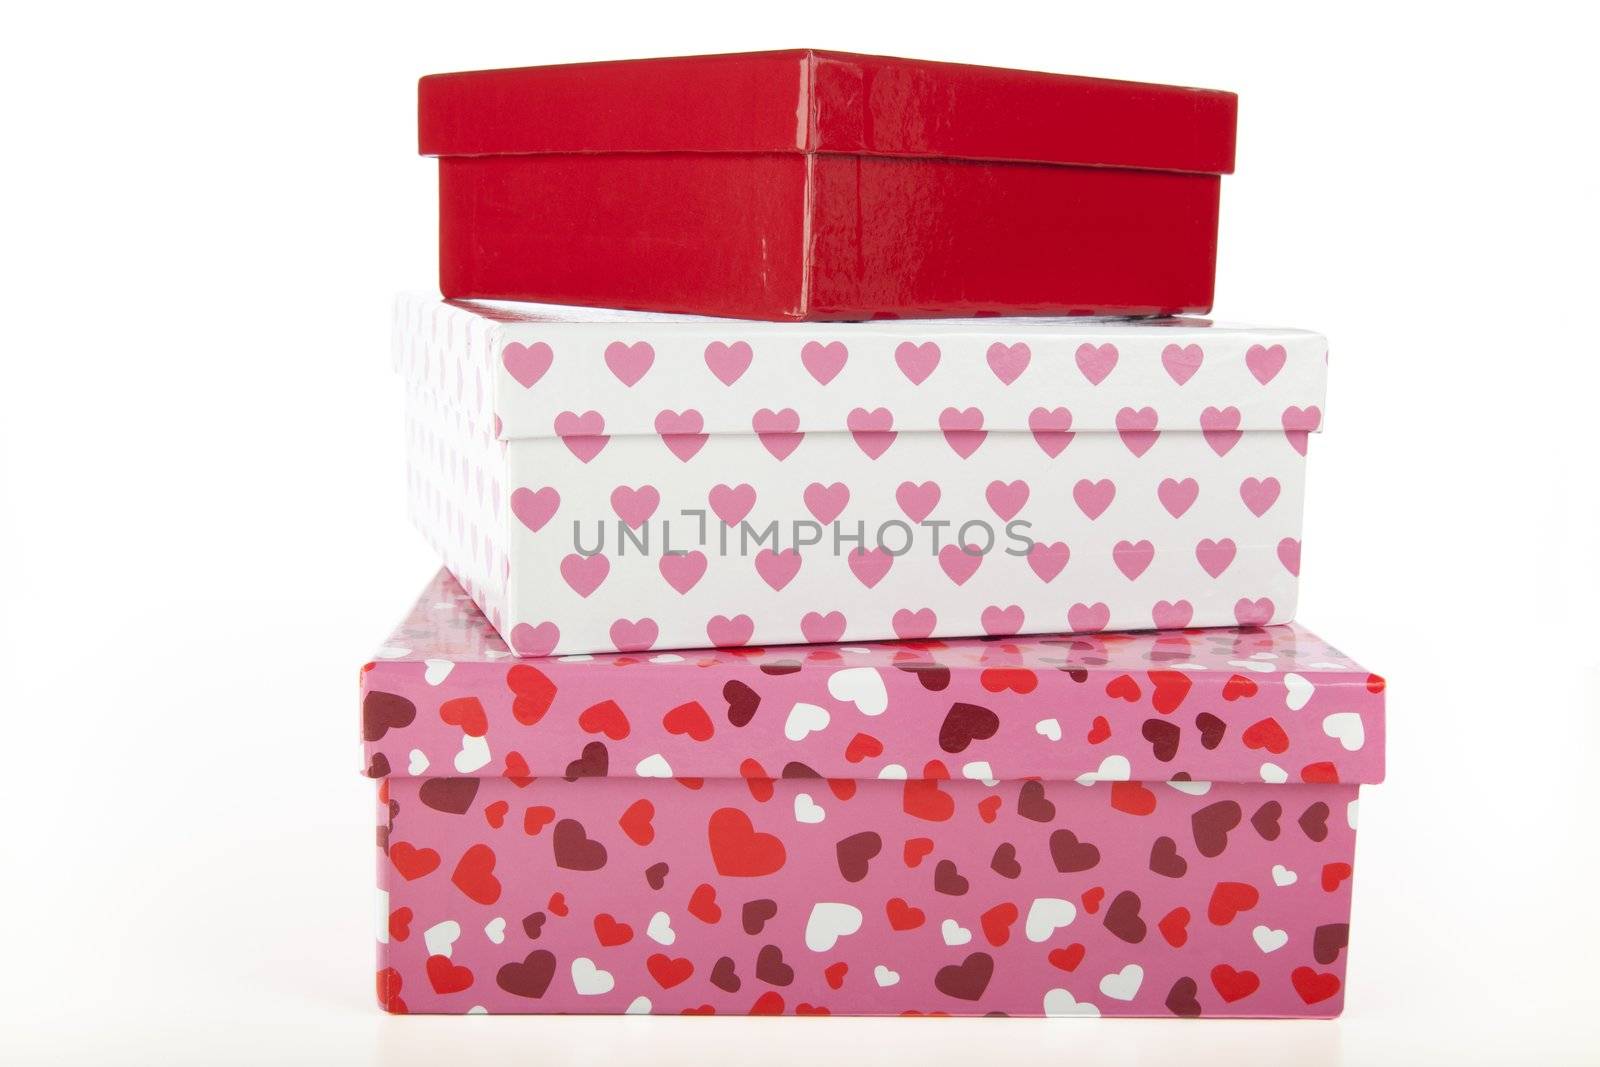 Three gift boxes with hearts and valentines colors on white background.